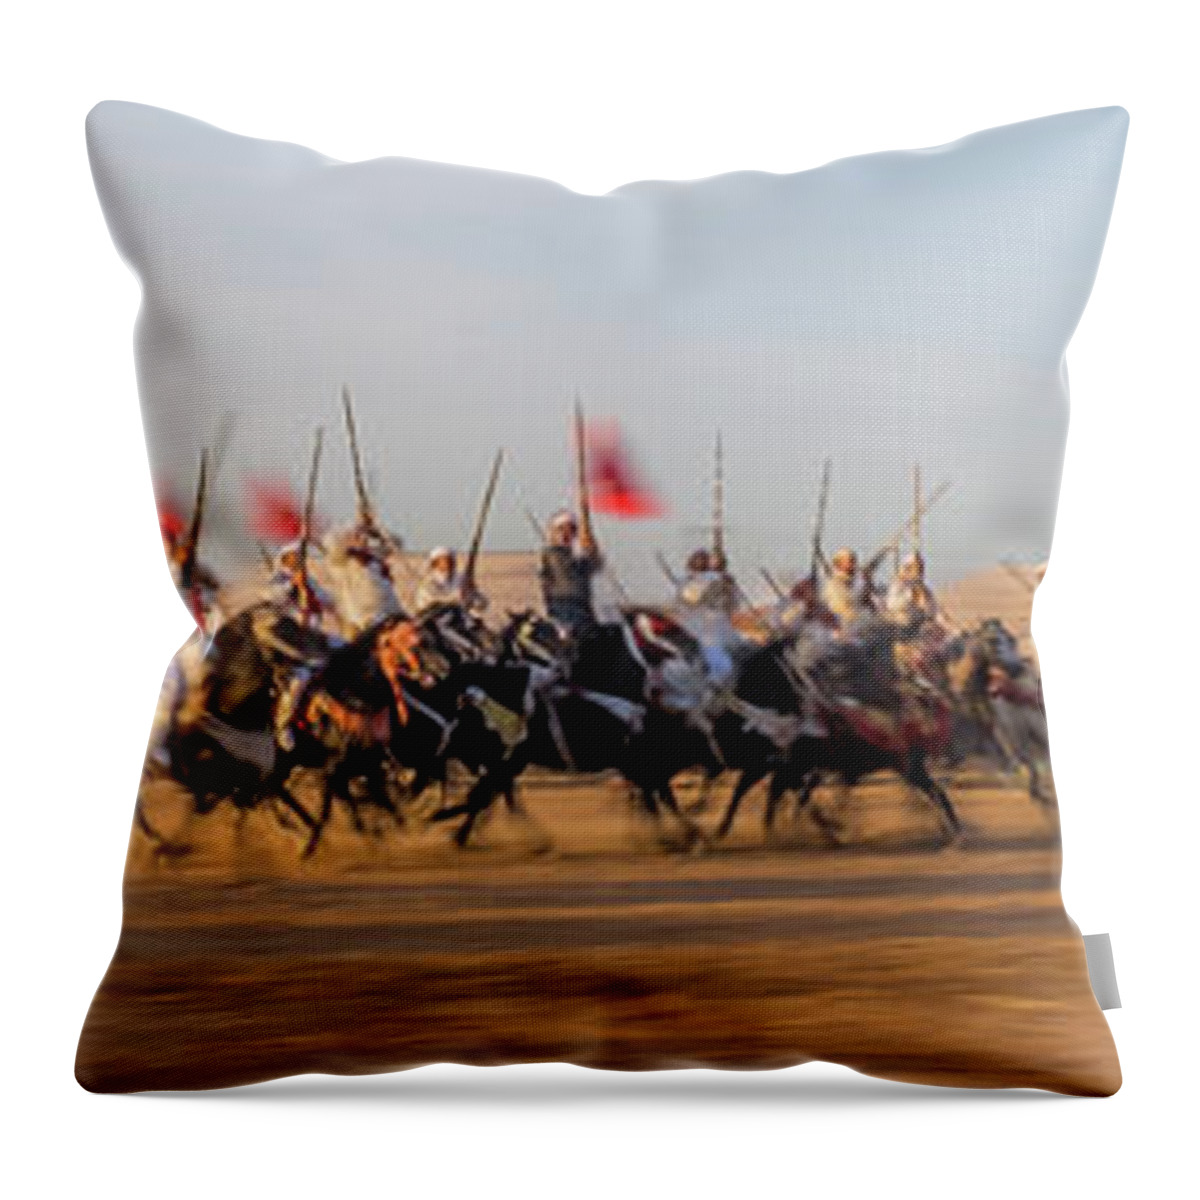 Festival Throw Pillow featuring the photograph Tbourida Festival by Arj Munoz